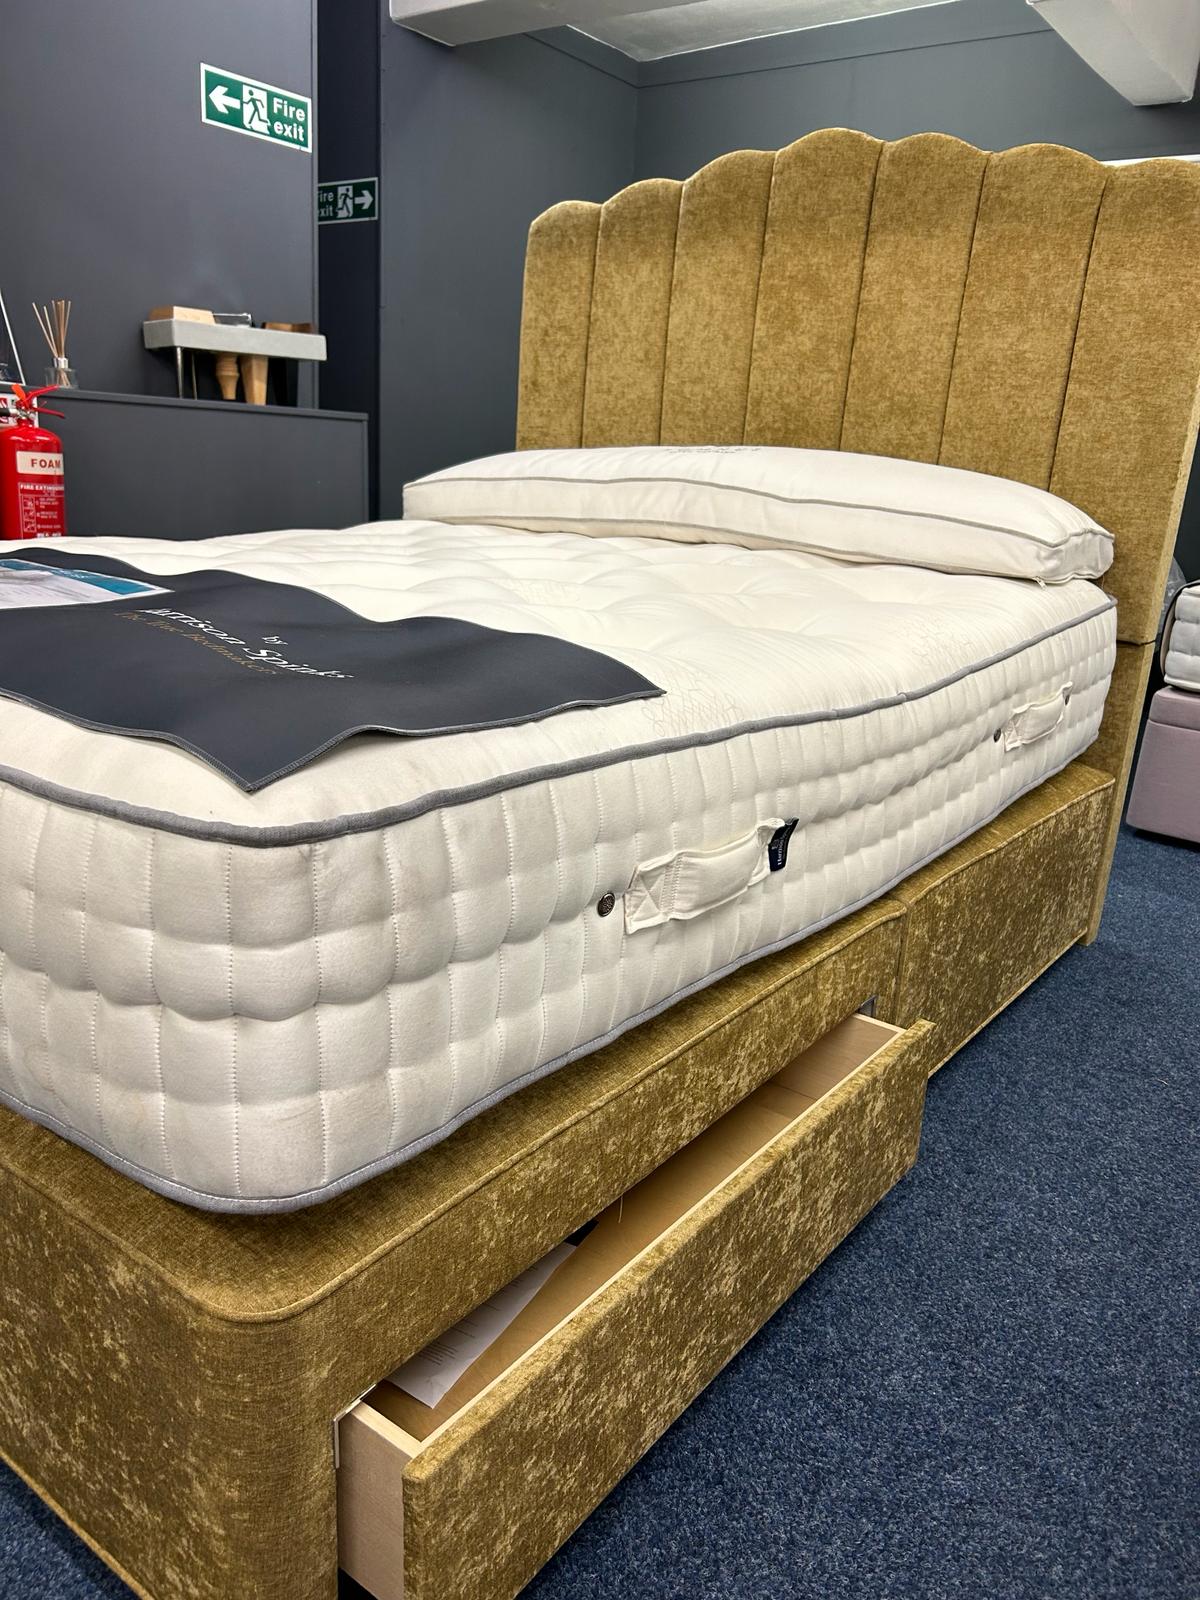 Ex display Harrison Spinks Somnus king size divan set with 2 drawers and easy access floor standing headboard.